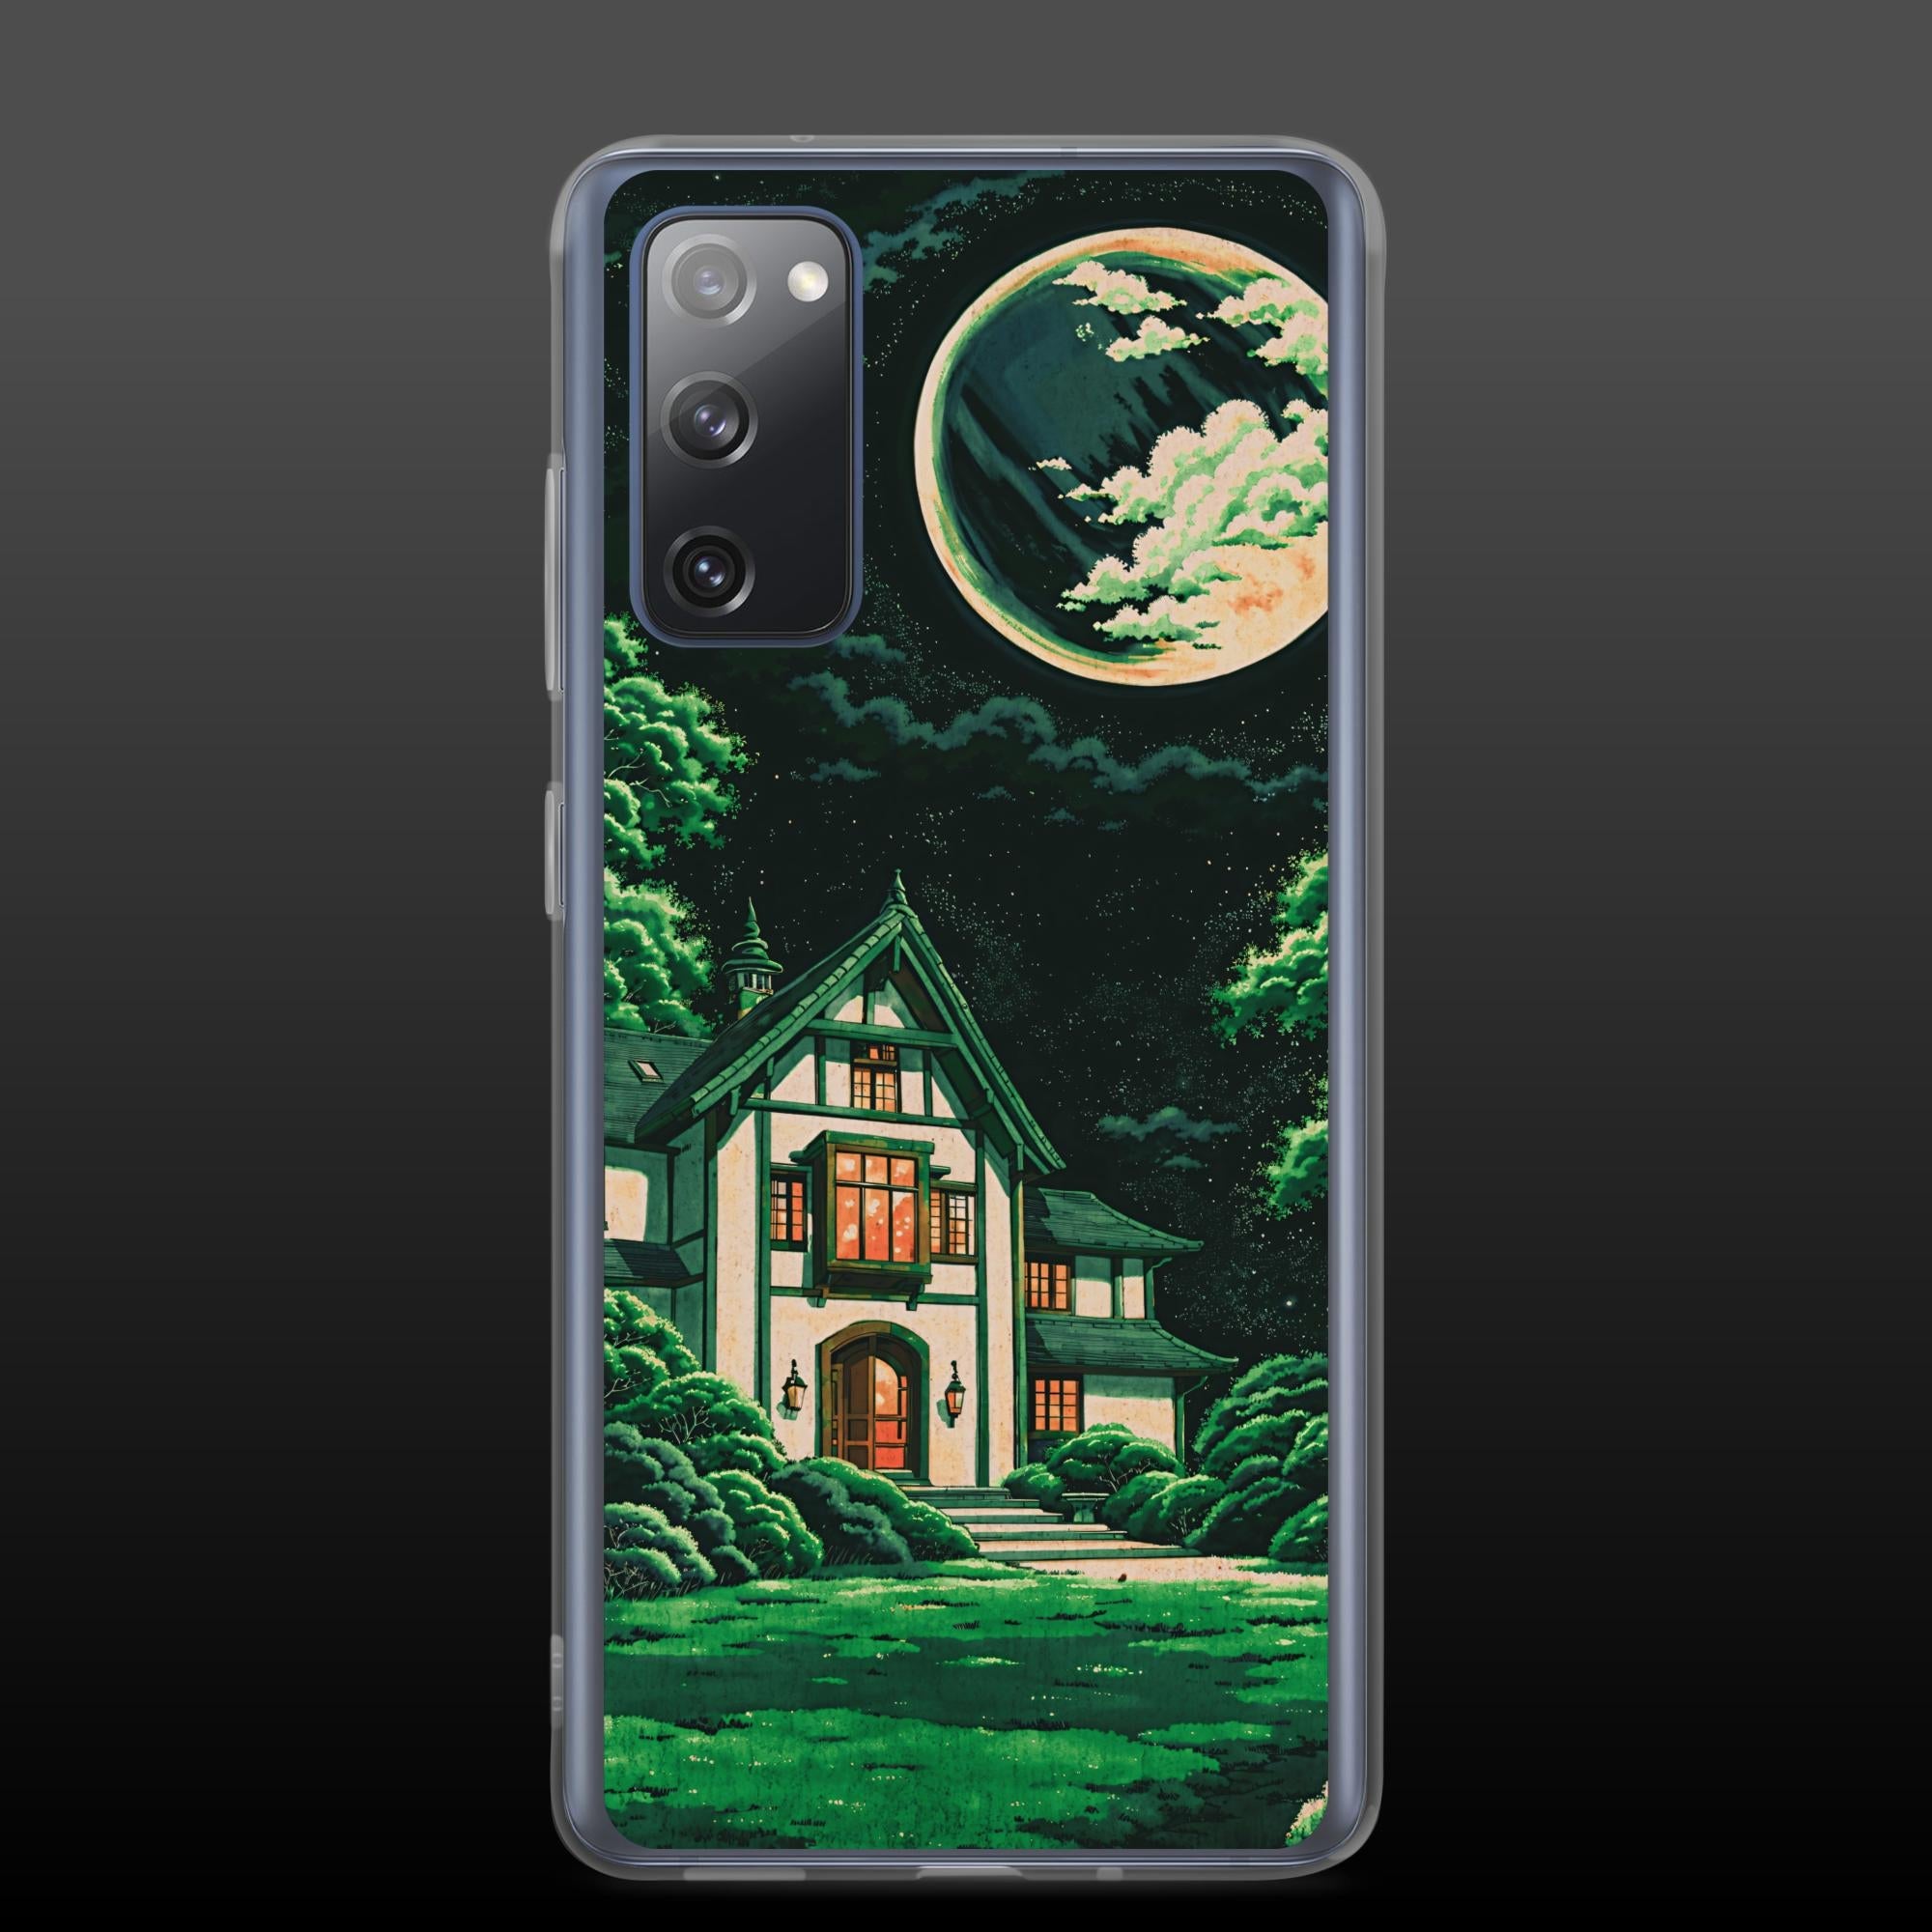 "Crescent night" clear samsung case - Clear samsung case - Ever colorful